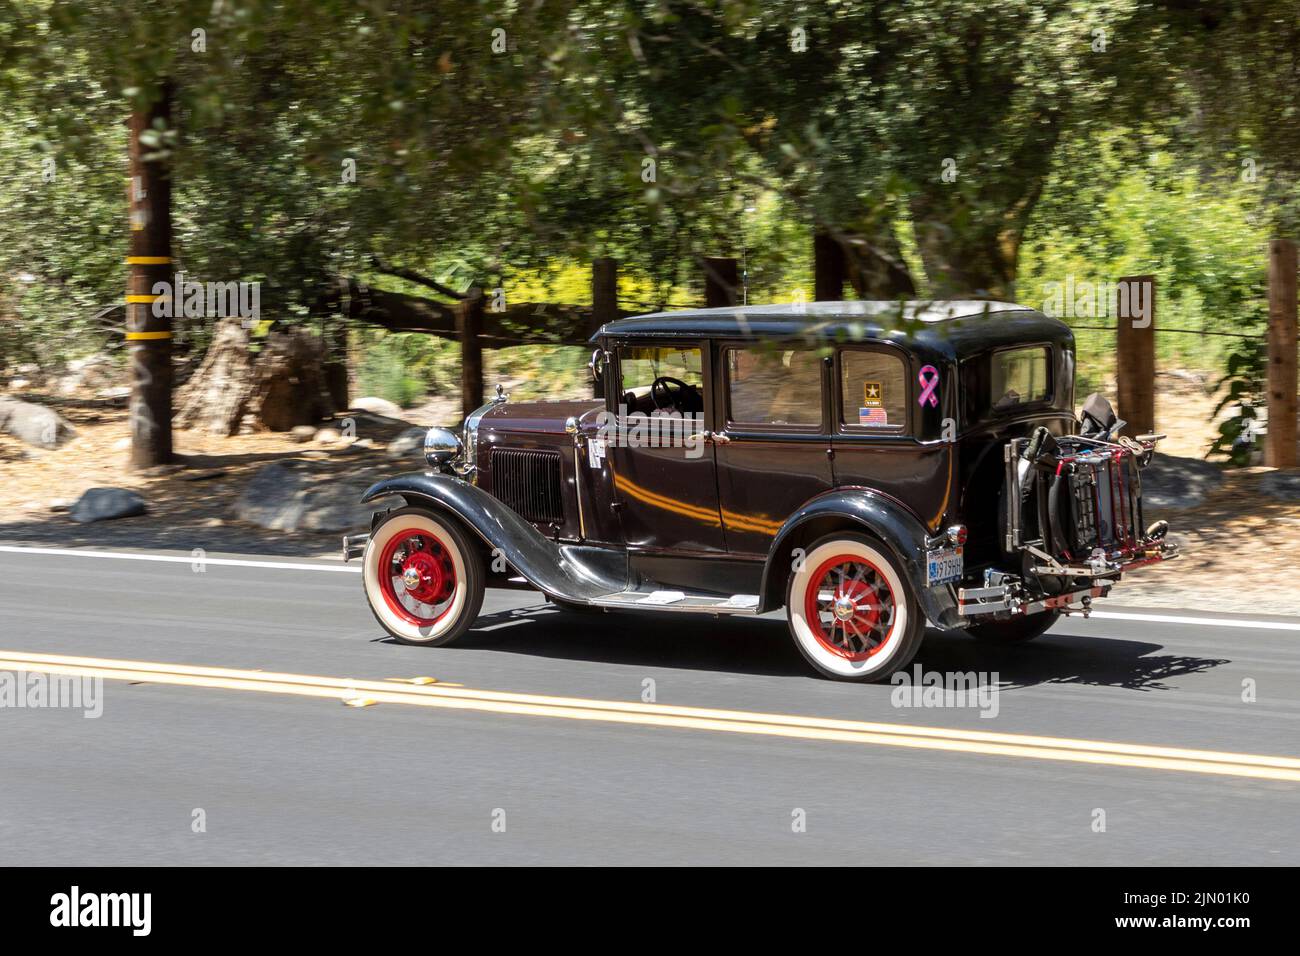 Three Rivers, USA - May 21, 2022: Old classic Ford model A car (1927-31) ready to drive. Stock Photo